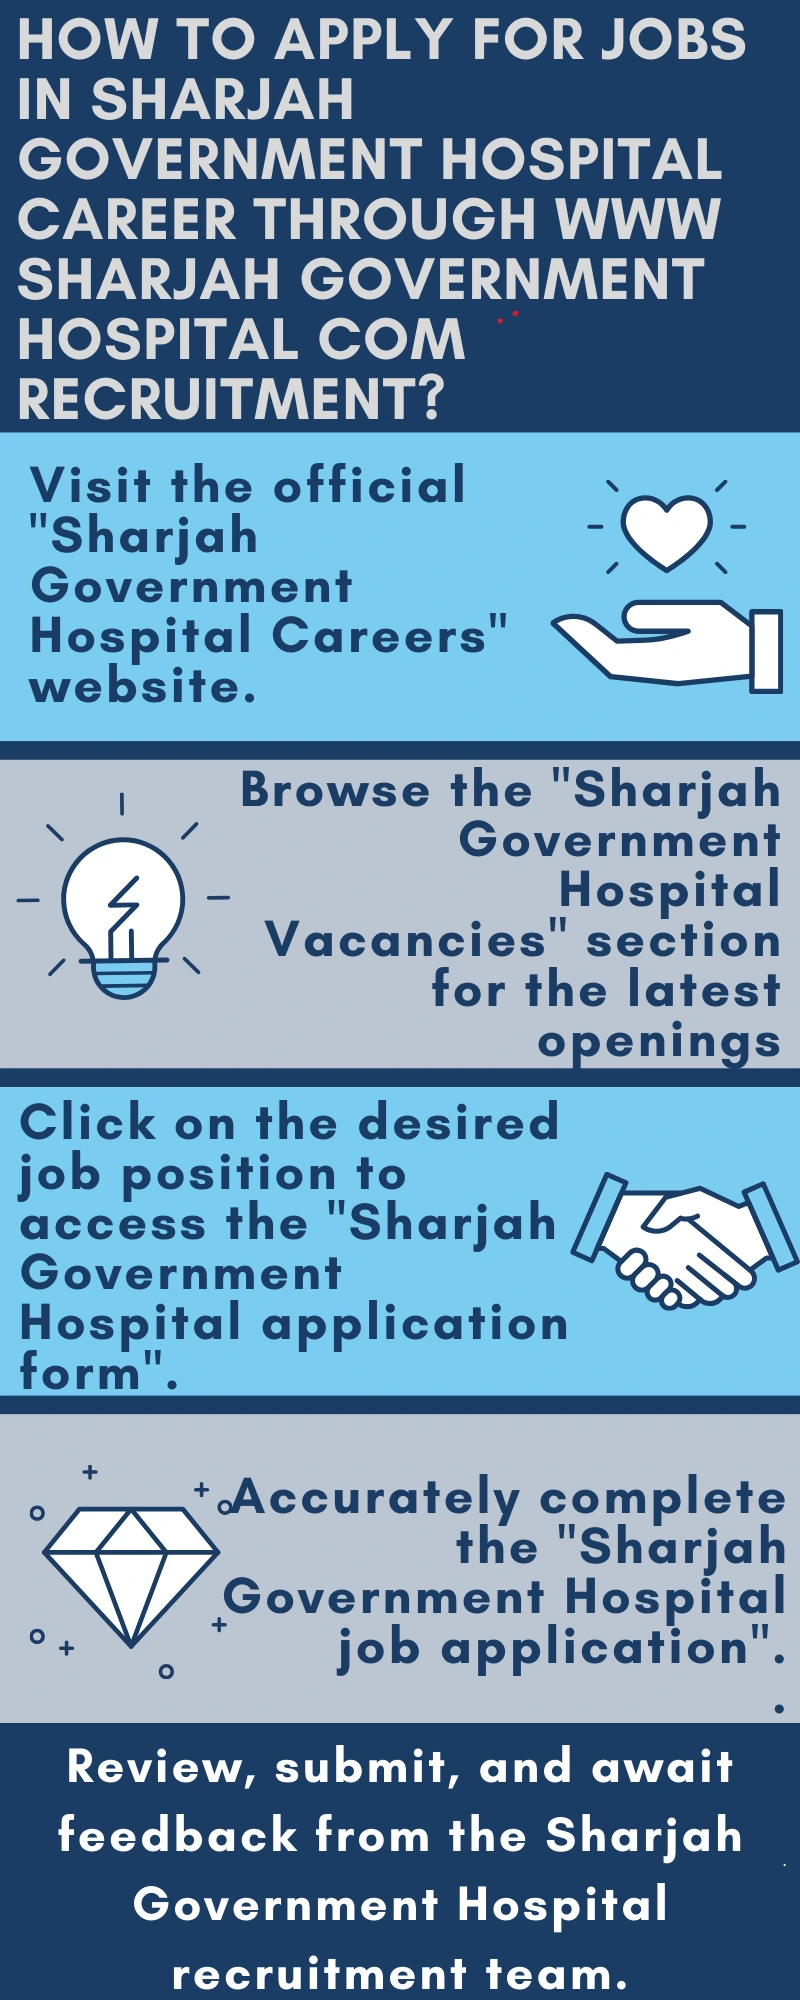 How to Apply for Jobs in Sharjah Government Hospital Career through www Sharjah Government Hospital com recruitment?